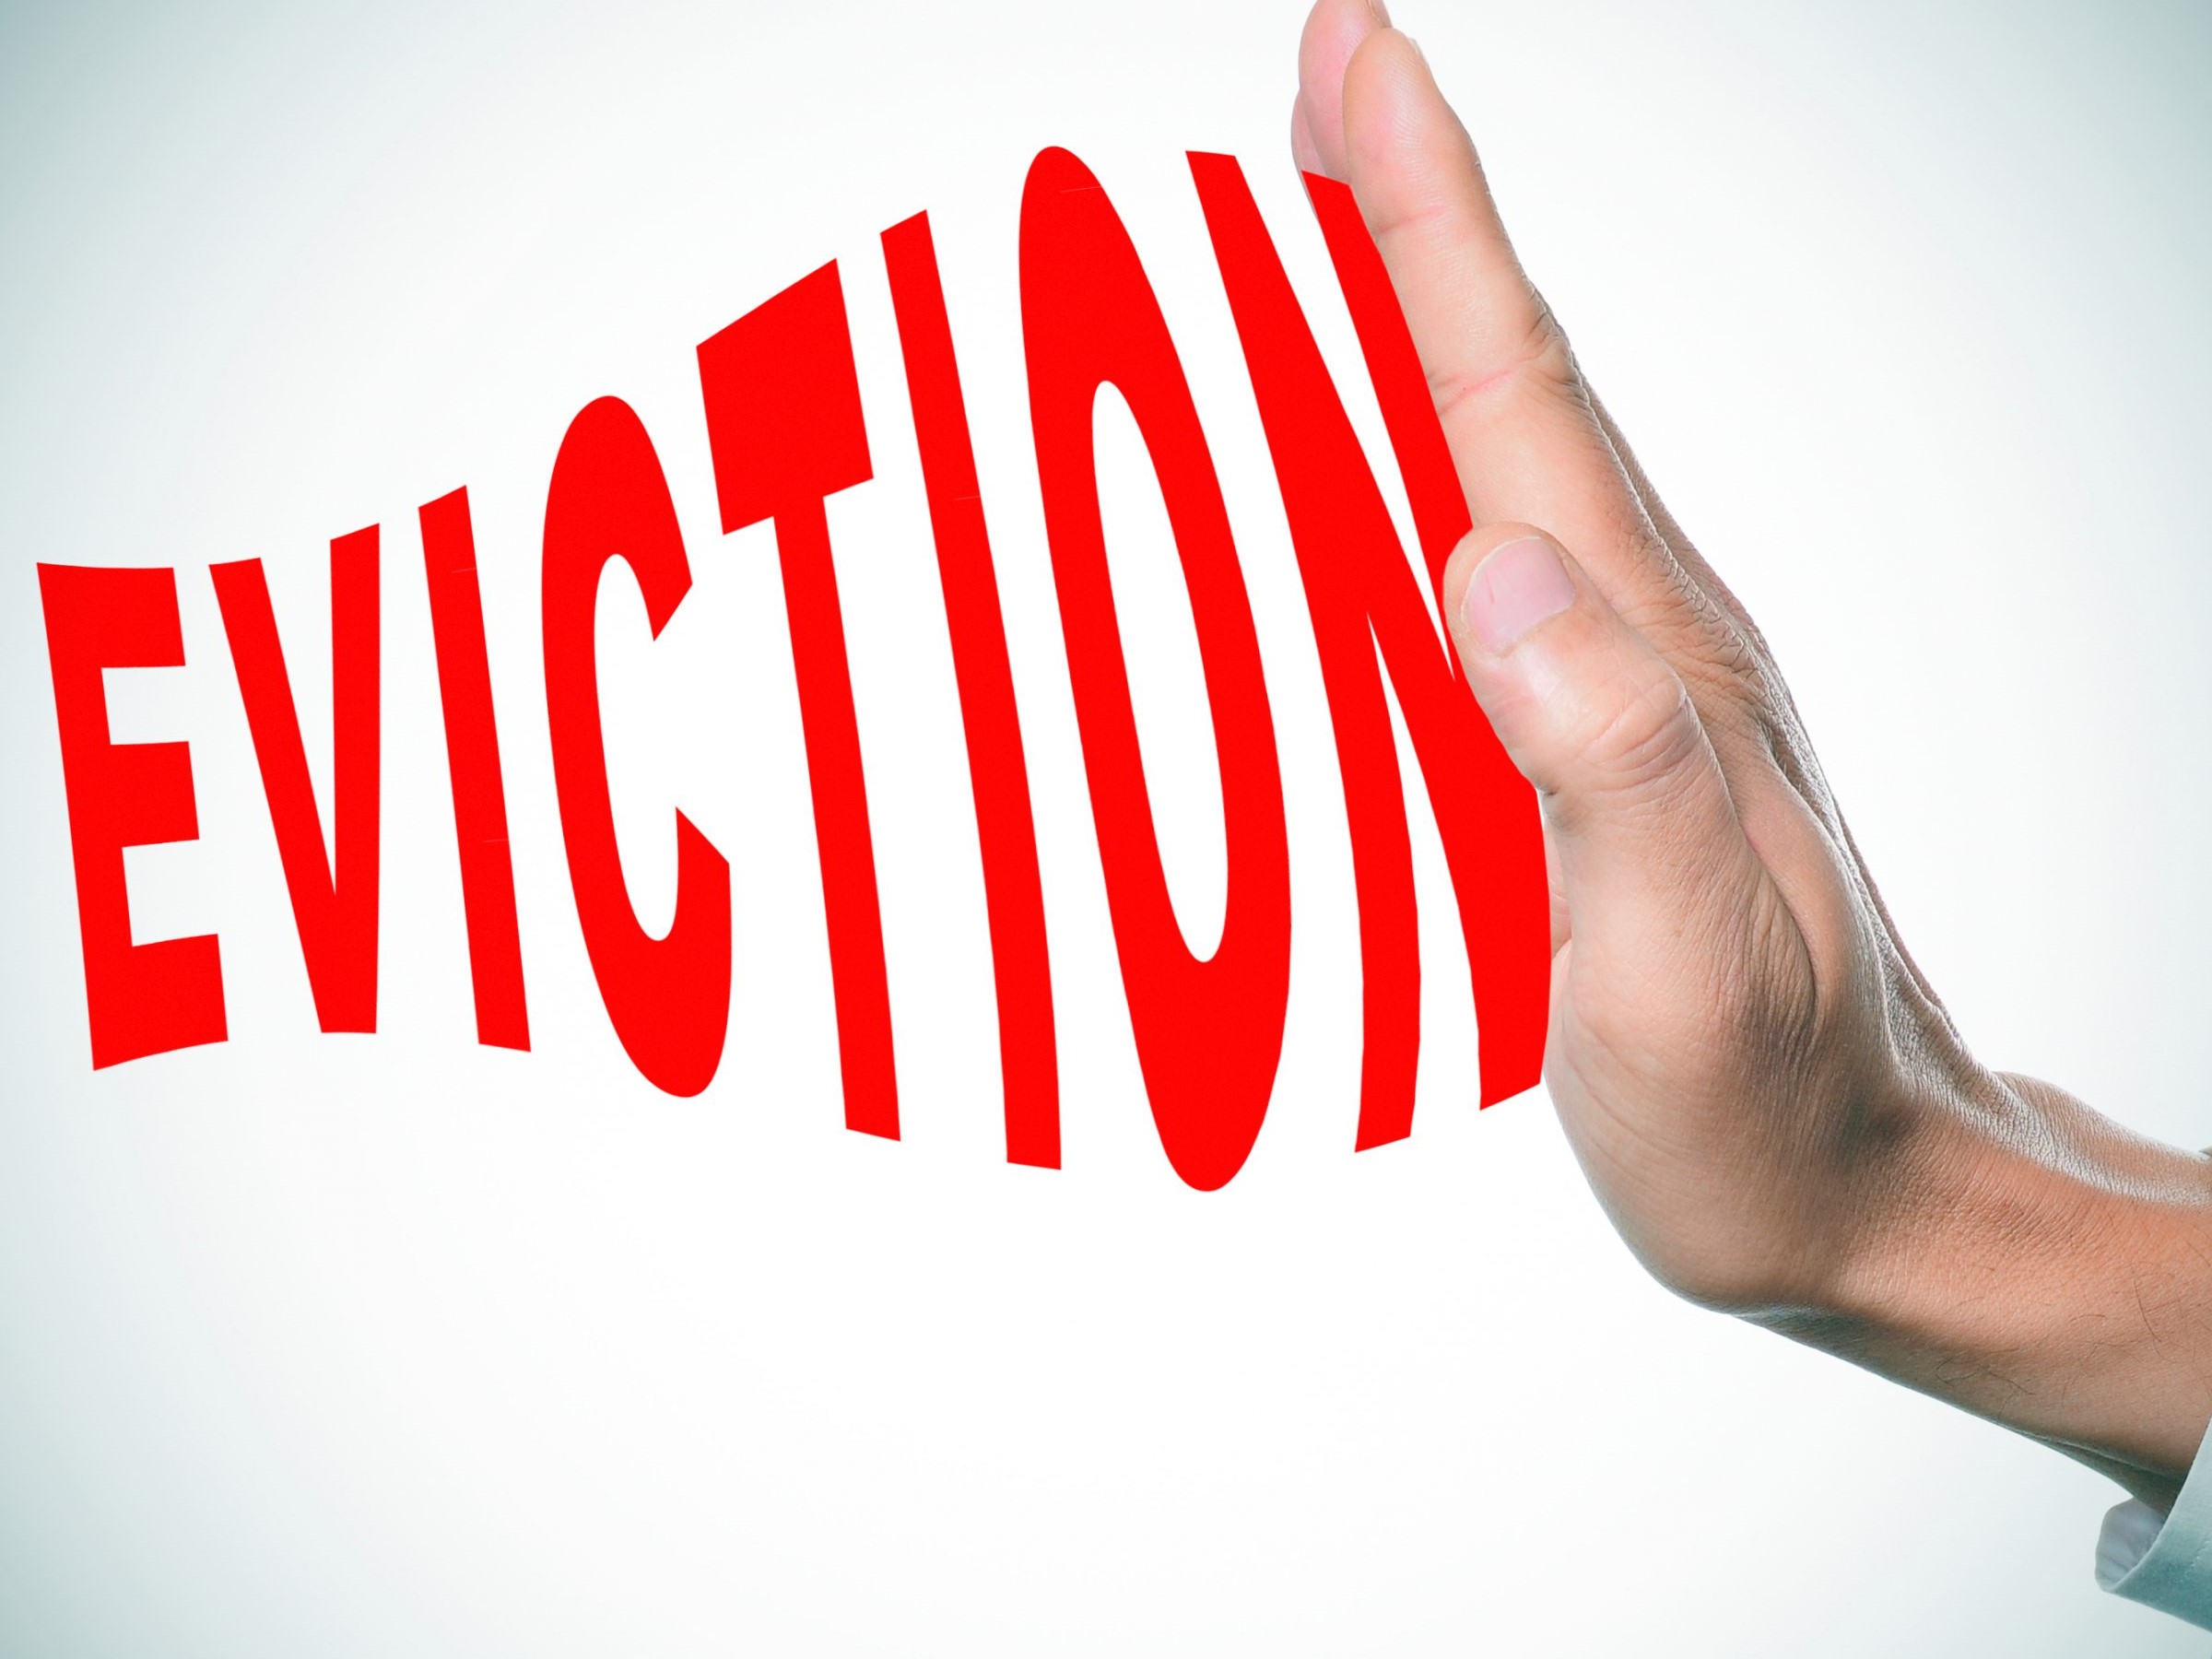 Renovictions: what are the impacts to tenants?